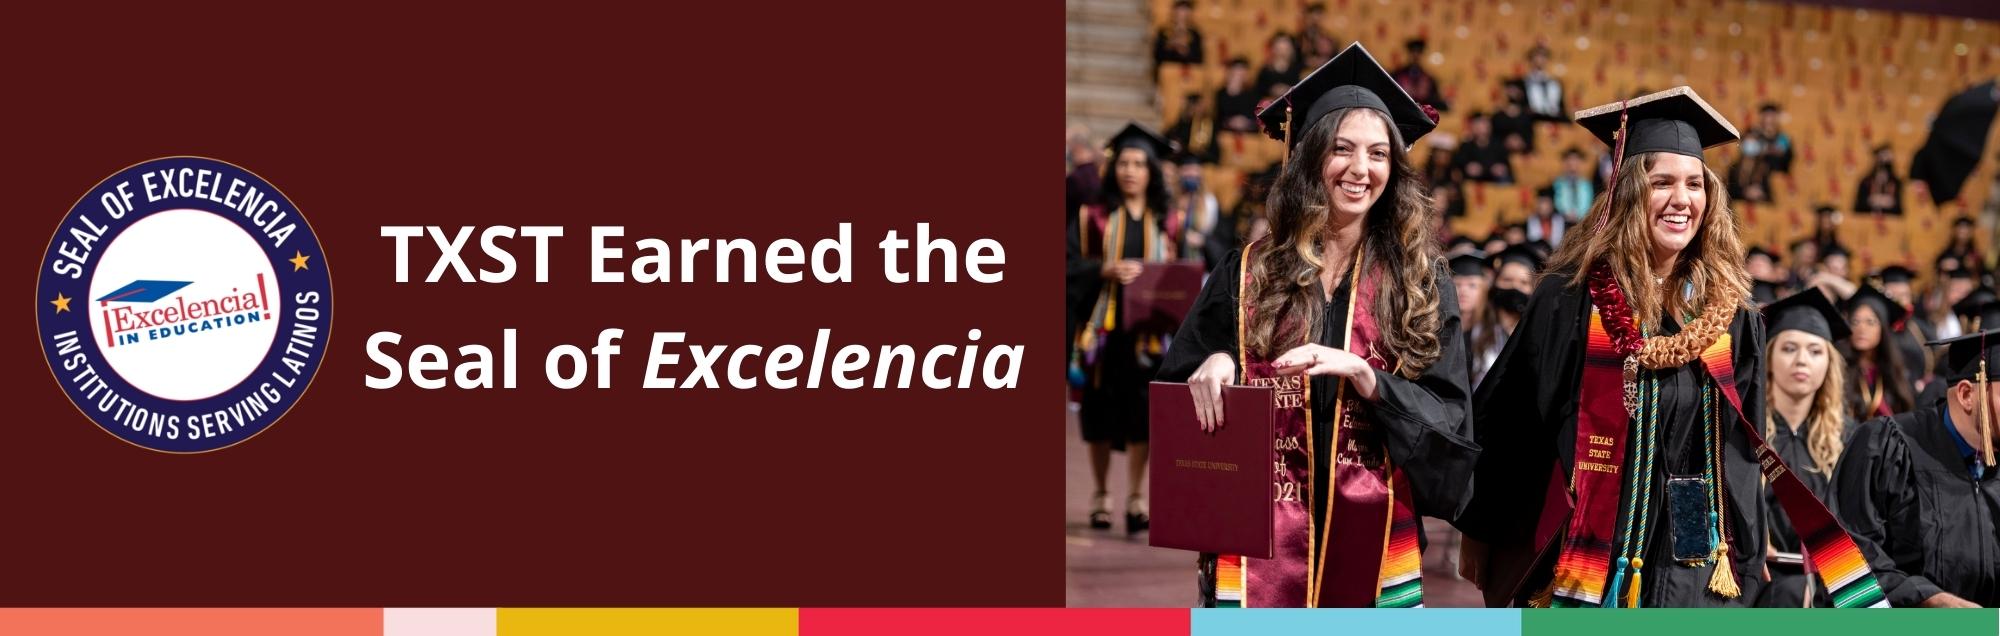 TXST Earned the Seal of Excelencia banner